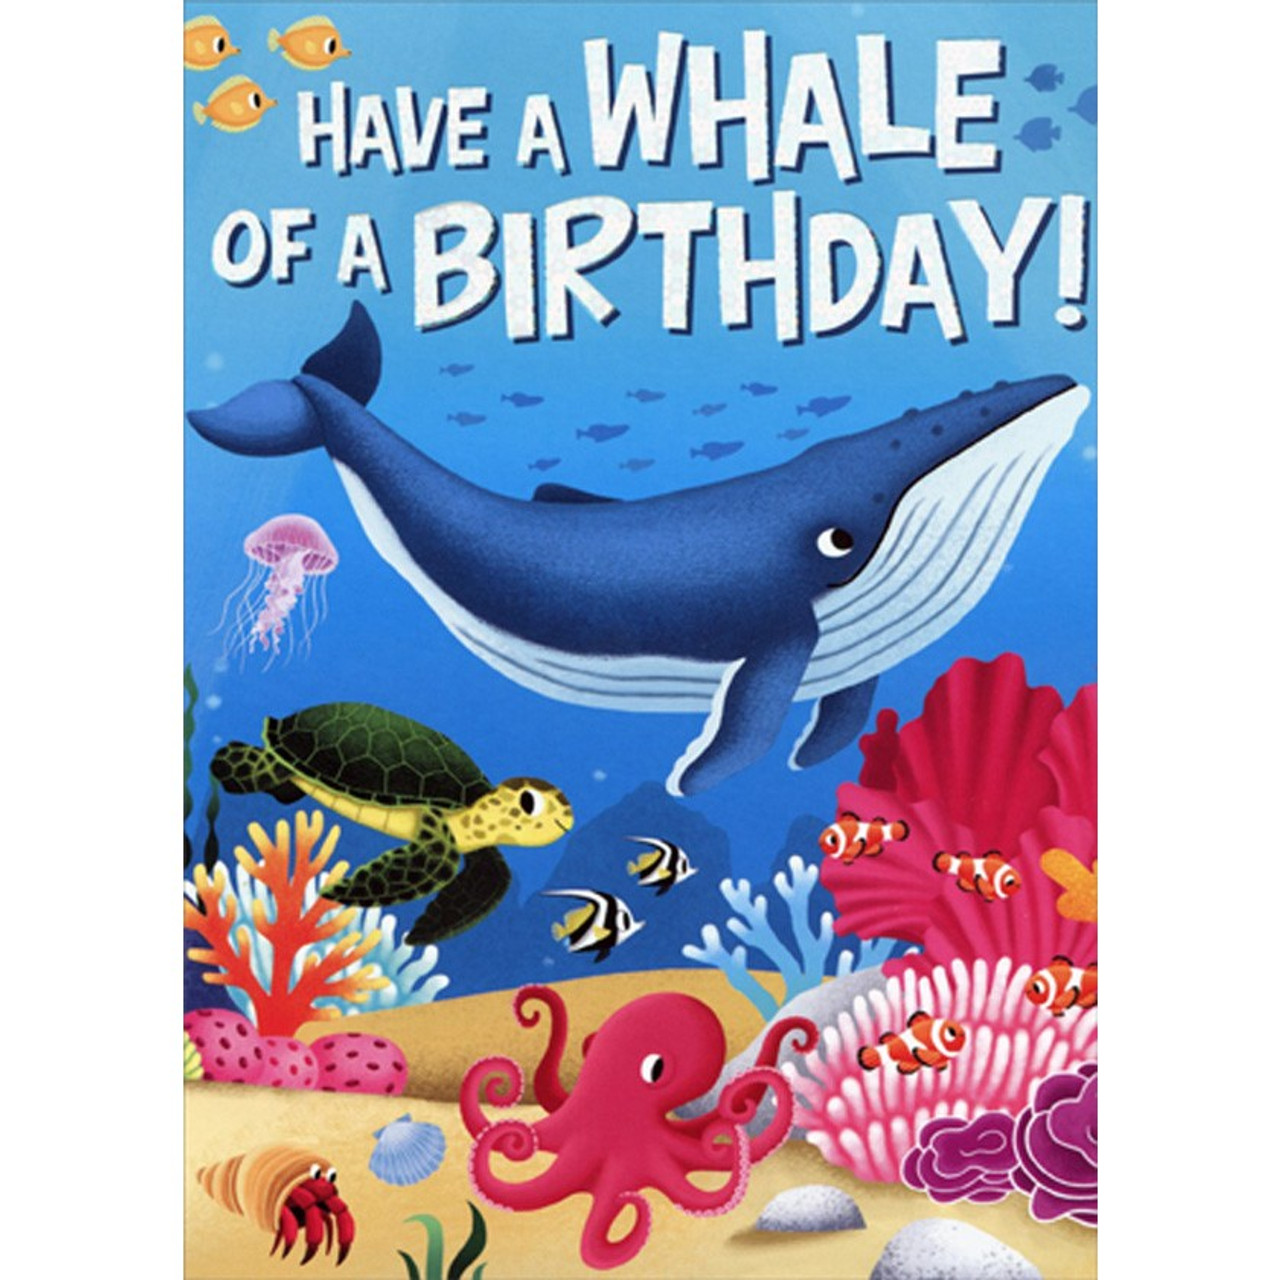 Whale, Turtle, Fish and Octopus at Ocean Floor Juvenile Birthday